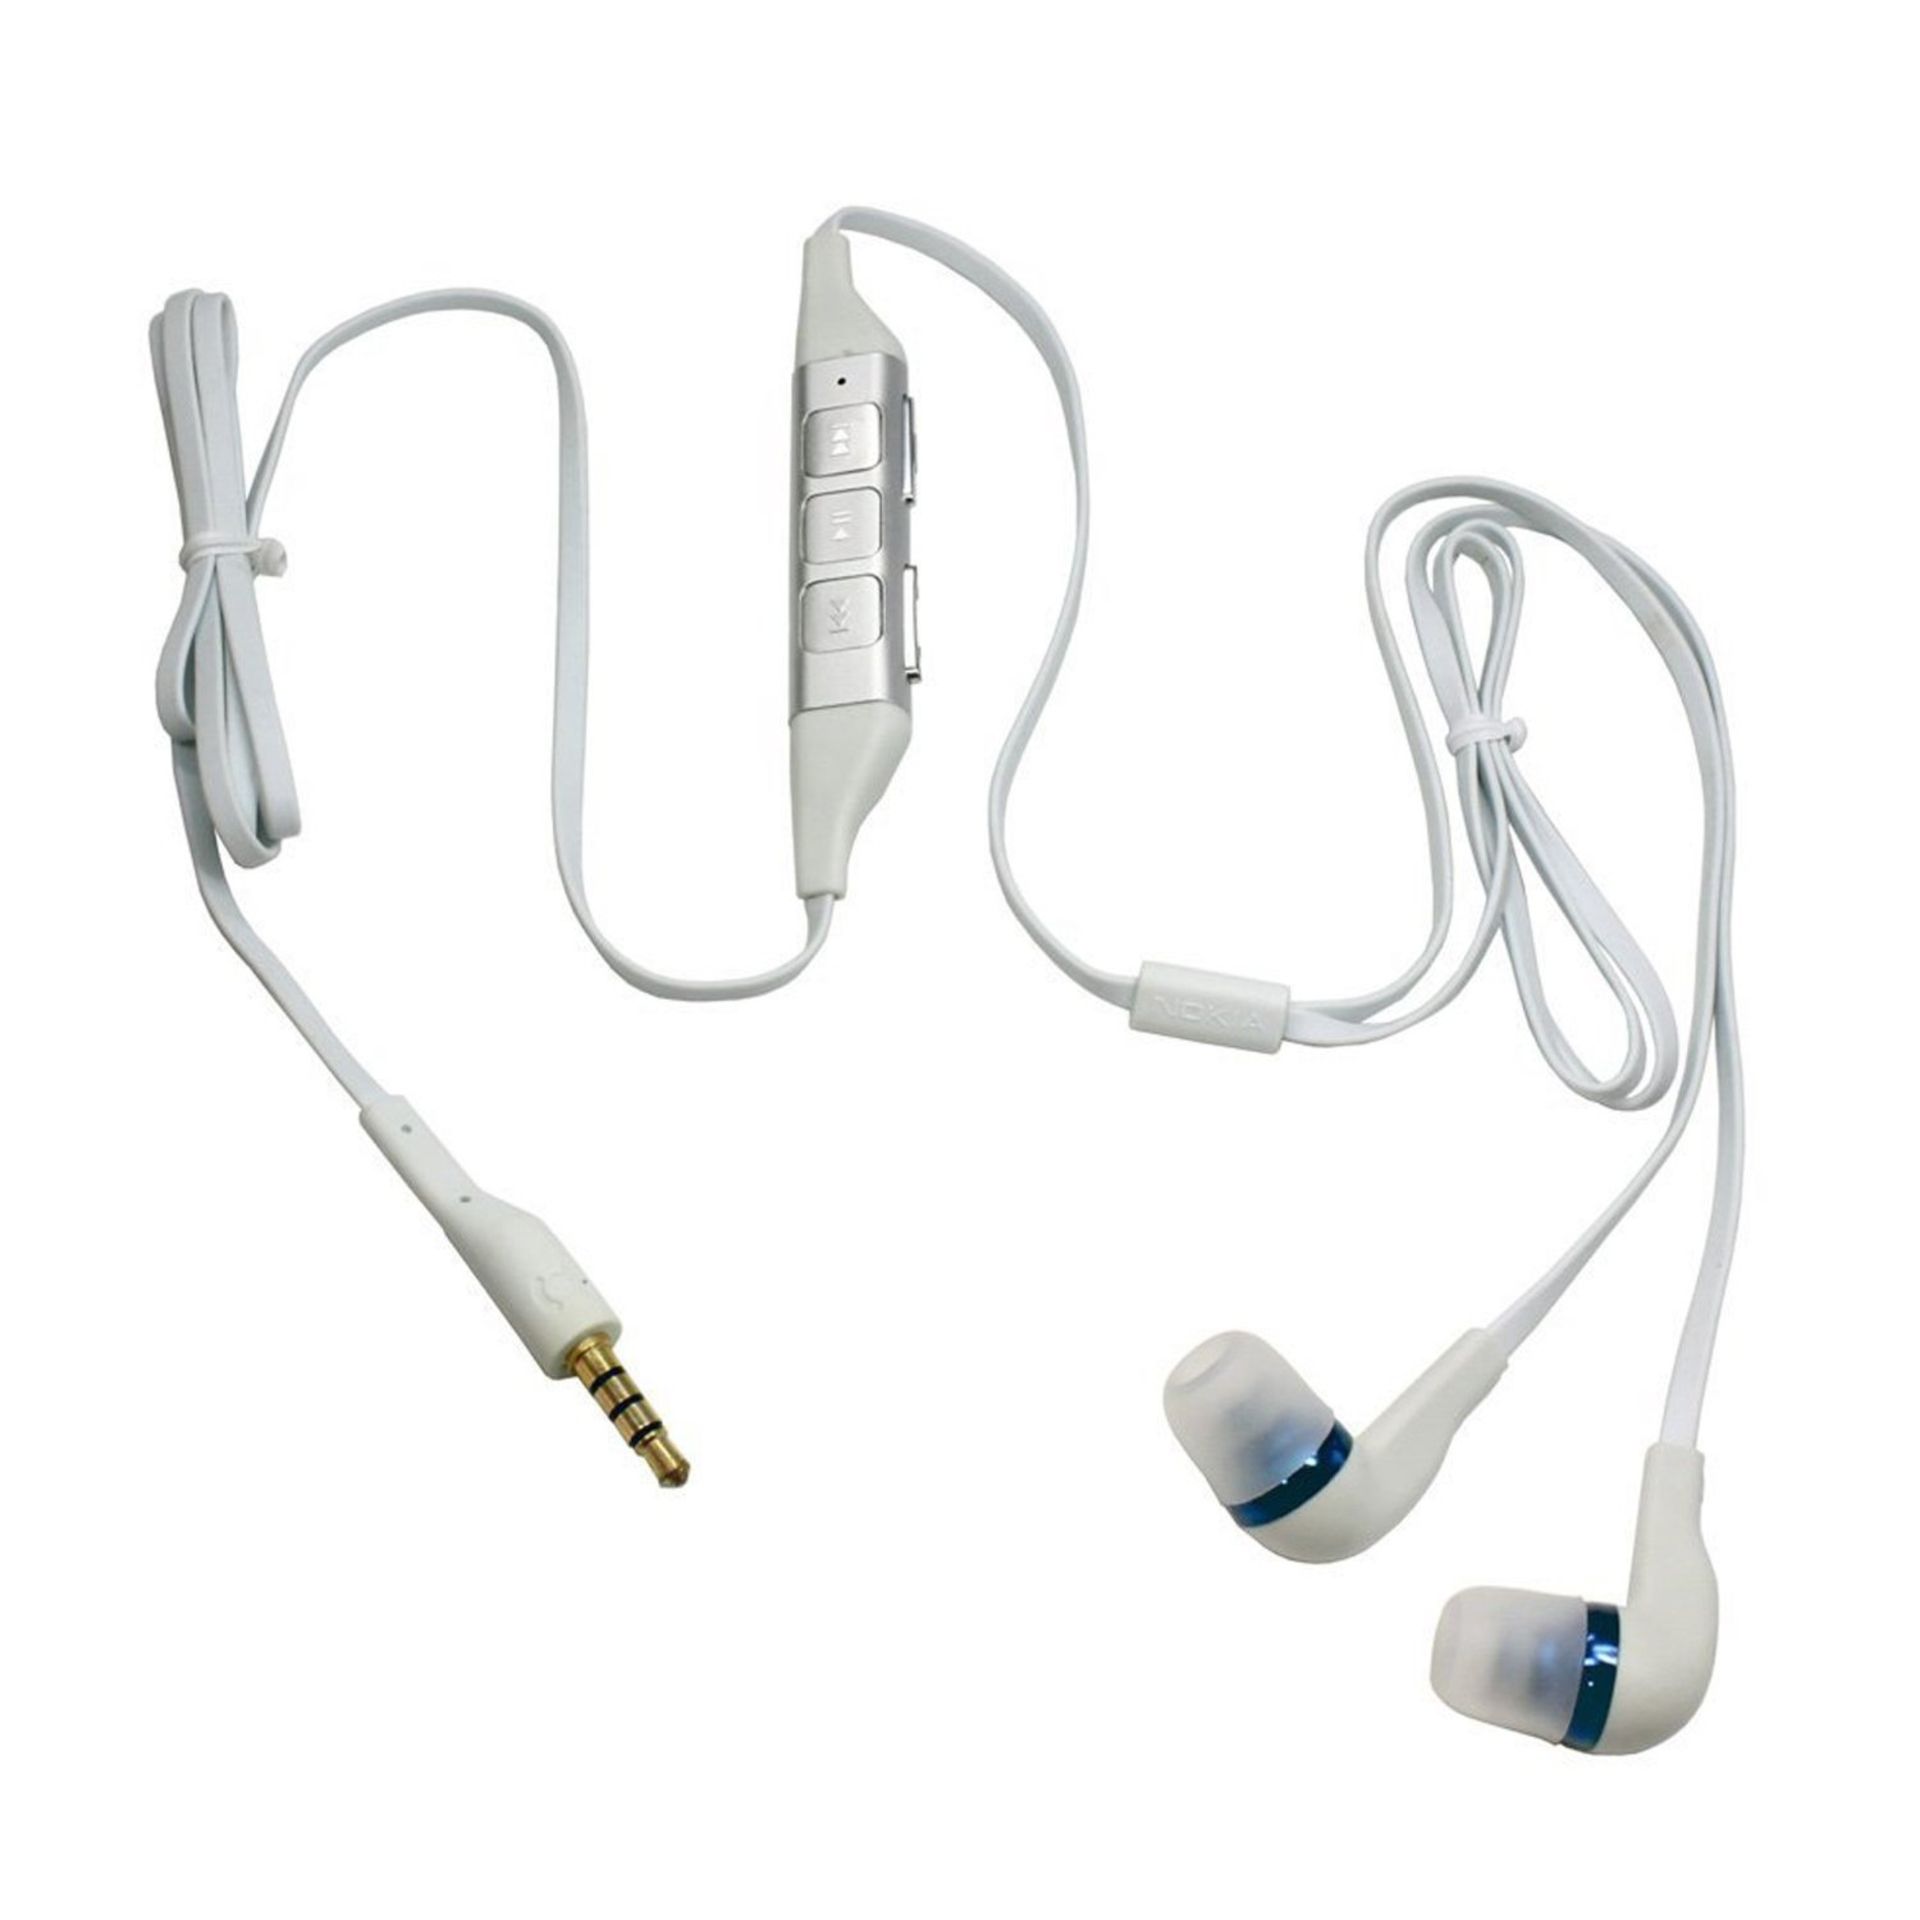 Lot of 50 Units-Nokia WH-701 Wired Stereo Music Headset (White) - Bulk Packed